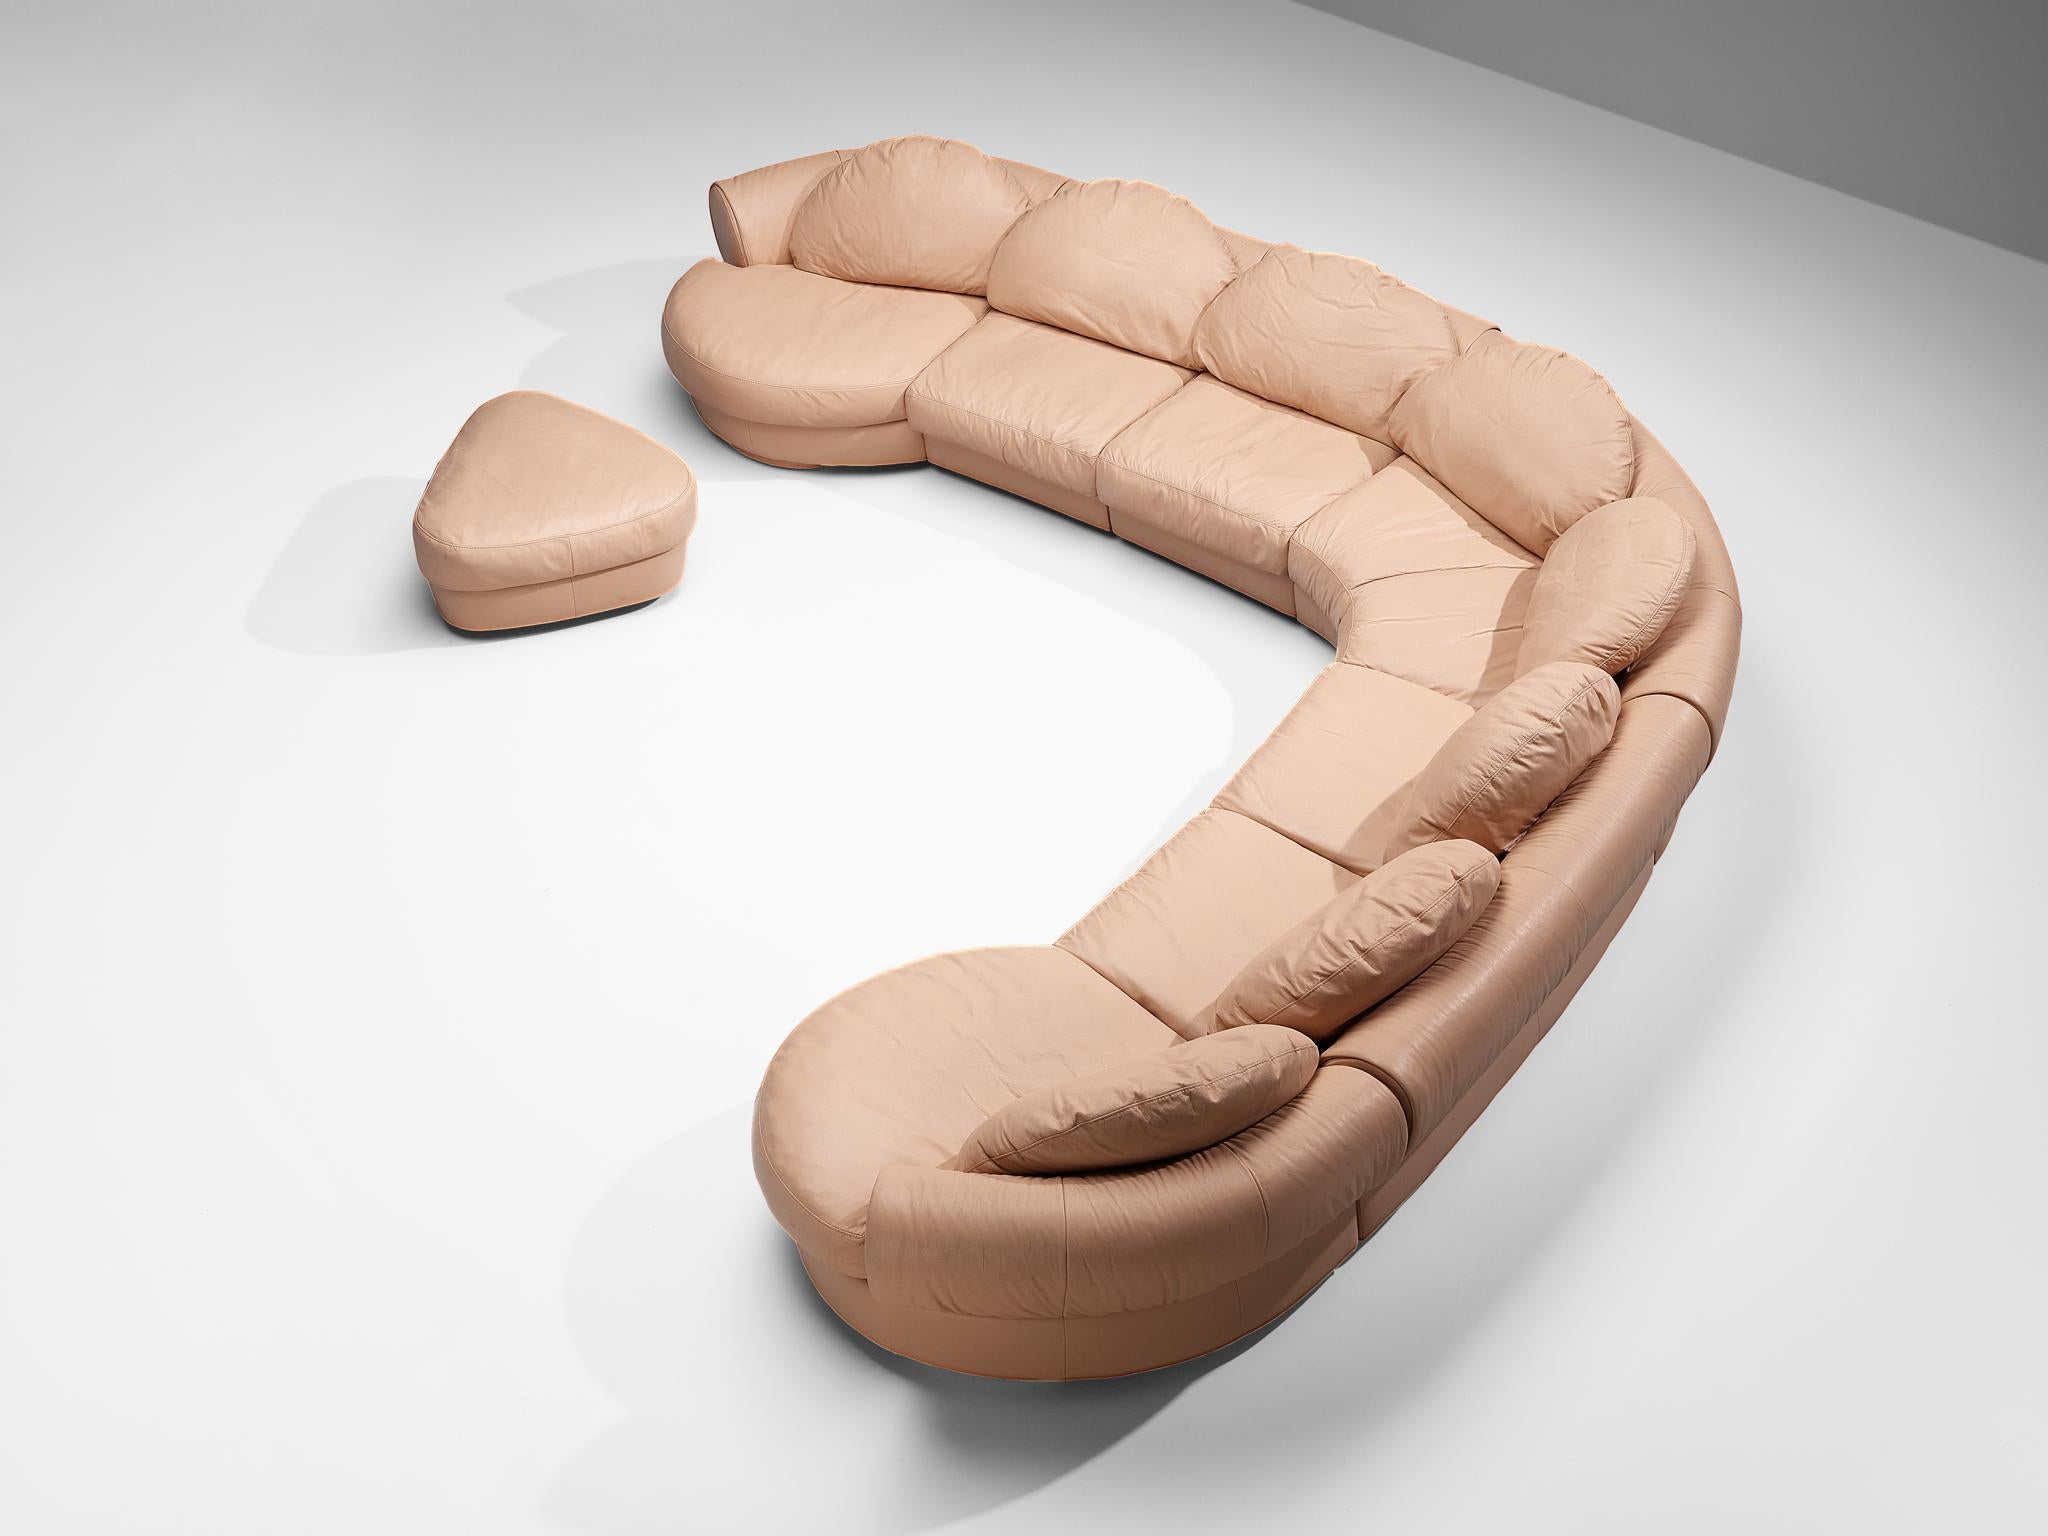 Attributed to Wiener Werkstätte, modular sofa, leather, plastic, Austria, 1970s.

This sofa is fully executed in a salmon pink leather that contributes to a unified look. The construction consists of seven elements and a matching ottoman, which